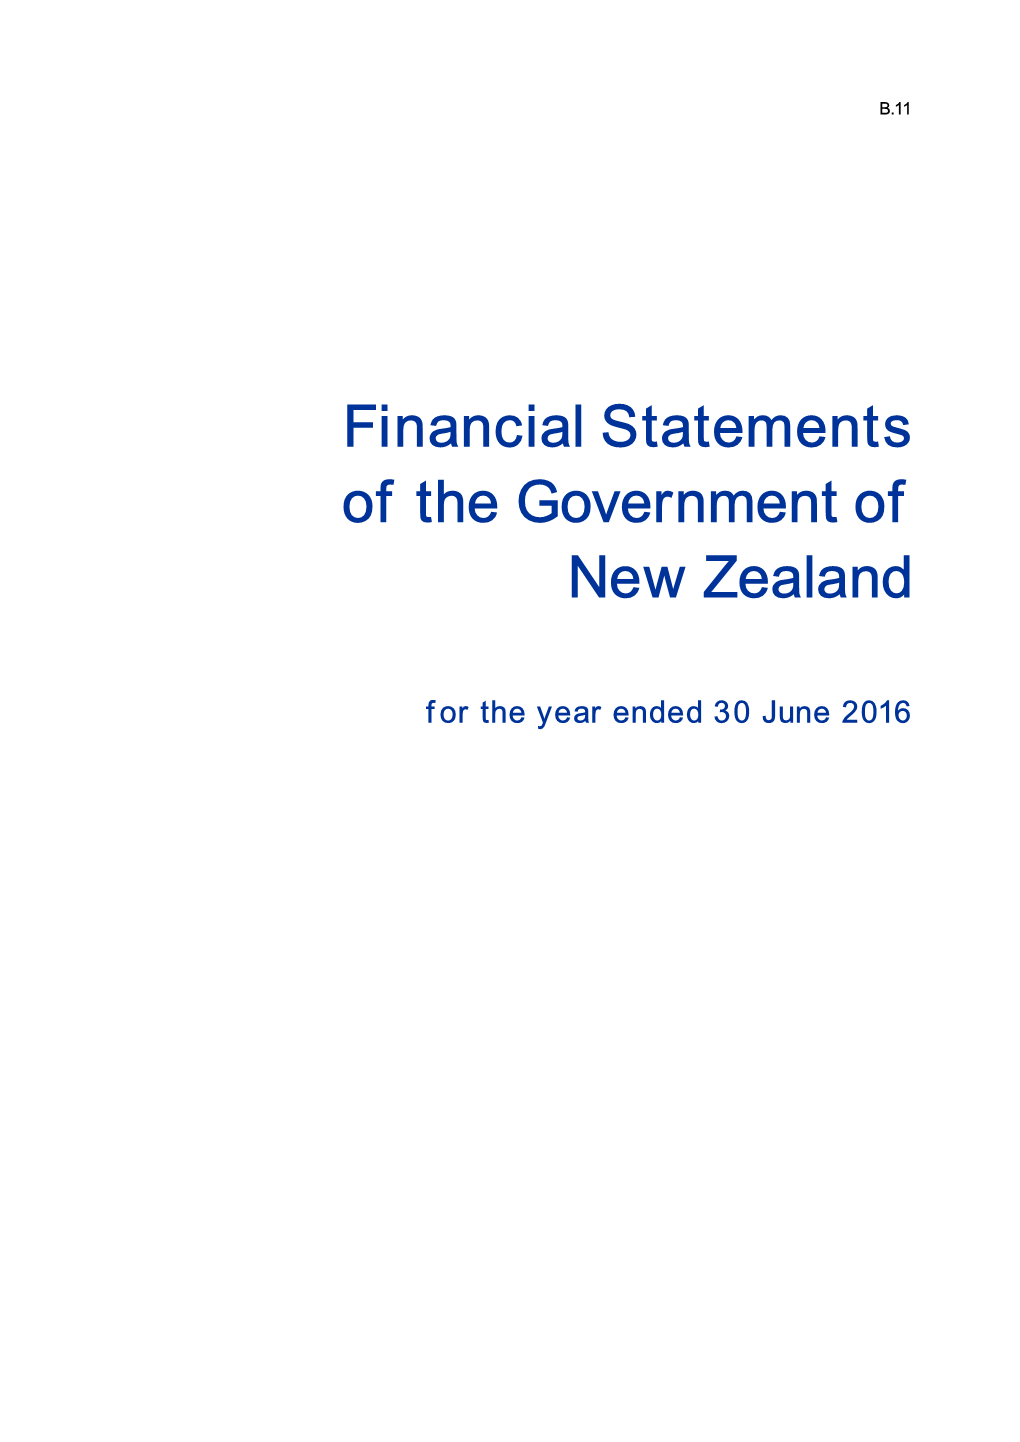 Financial Statements of the Government of New Zealand for the Year Ended 30 June 2016